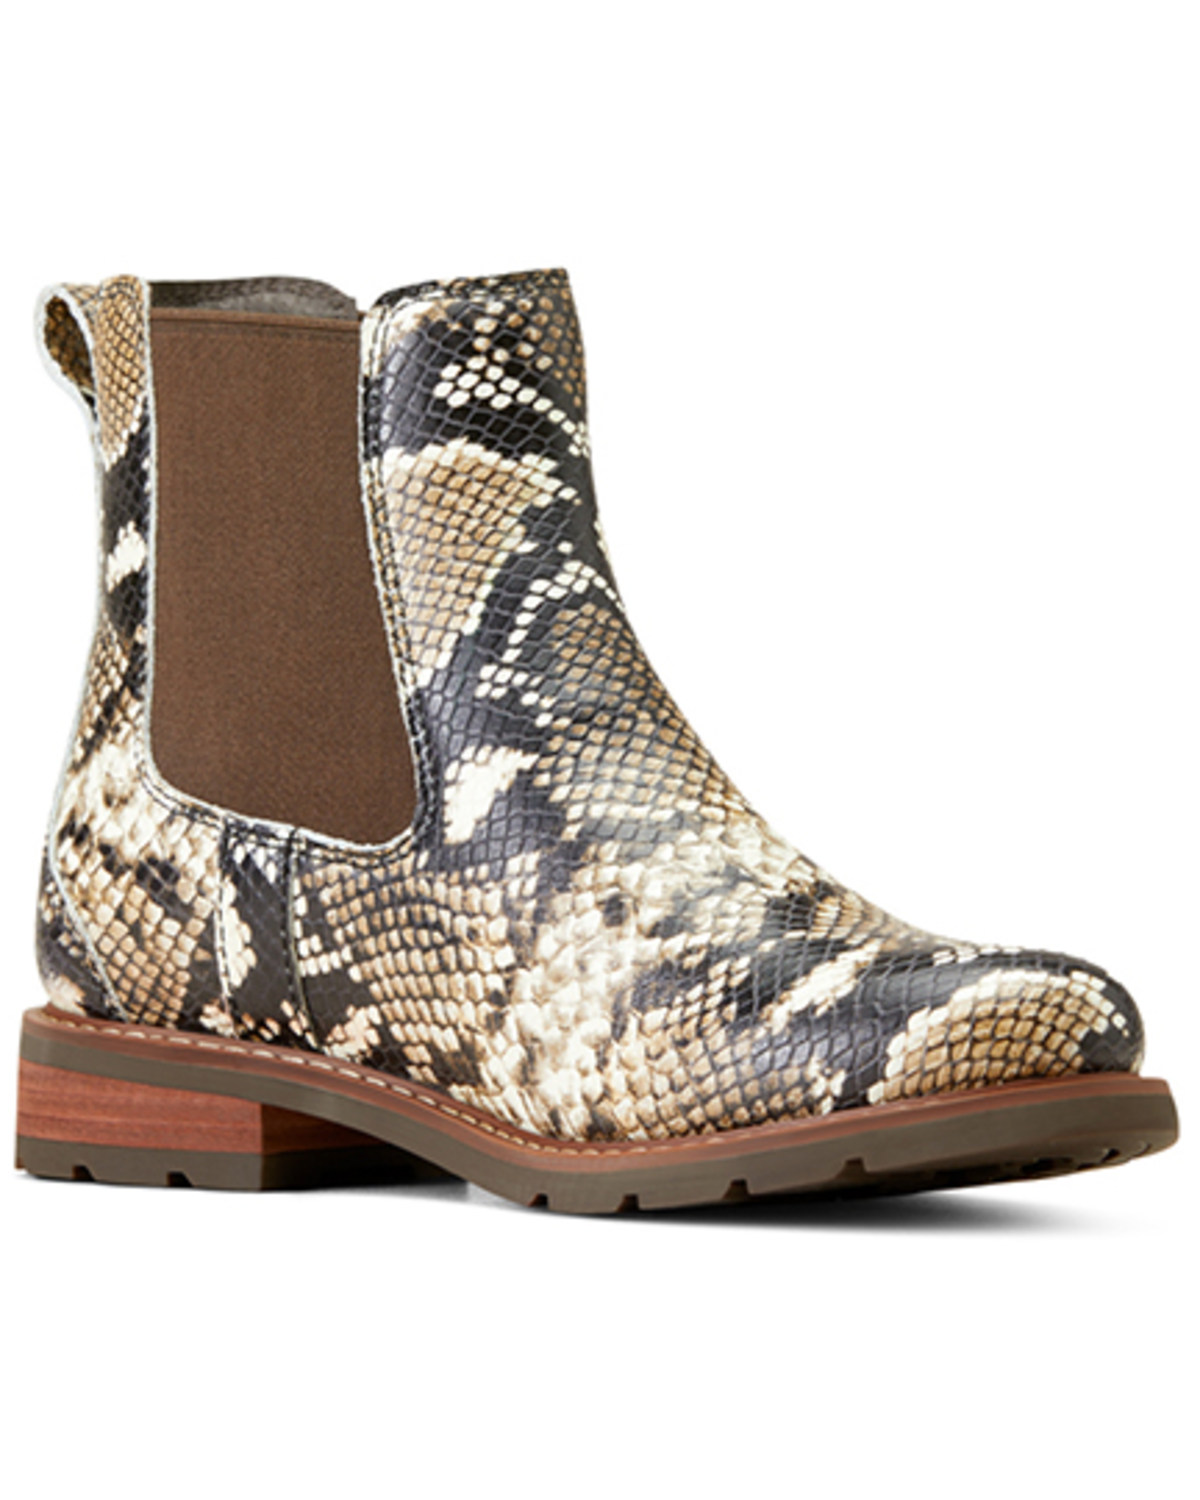 Ariat Women's Snake Print Wexford Boots - Round Toe